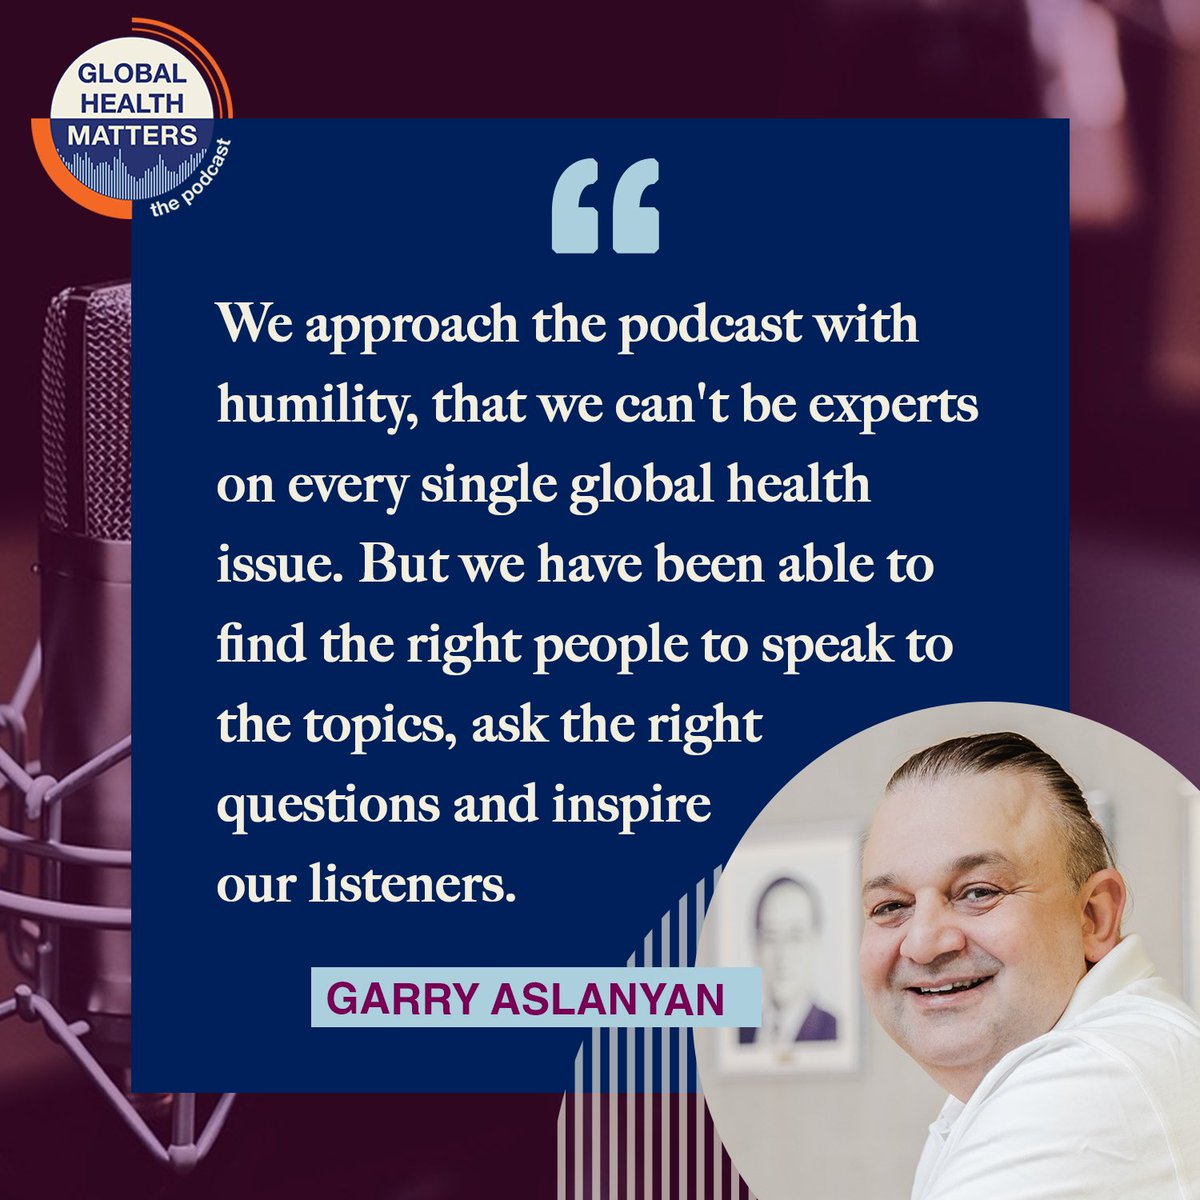 Producing a podcast requires great consideration in identifying representative guests, asking thoughtful questions, and drawing out relevant and transferable lessons for a global audience. Listen to this bonus episode here 👉 tinyurl.com/GHM-E36 @GarryAslanyan @lindivn